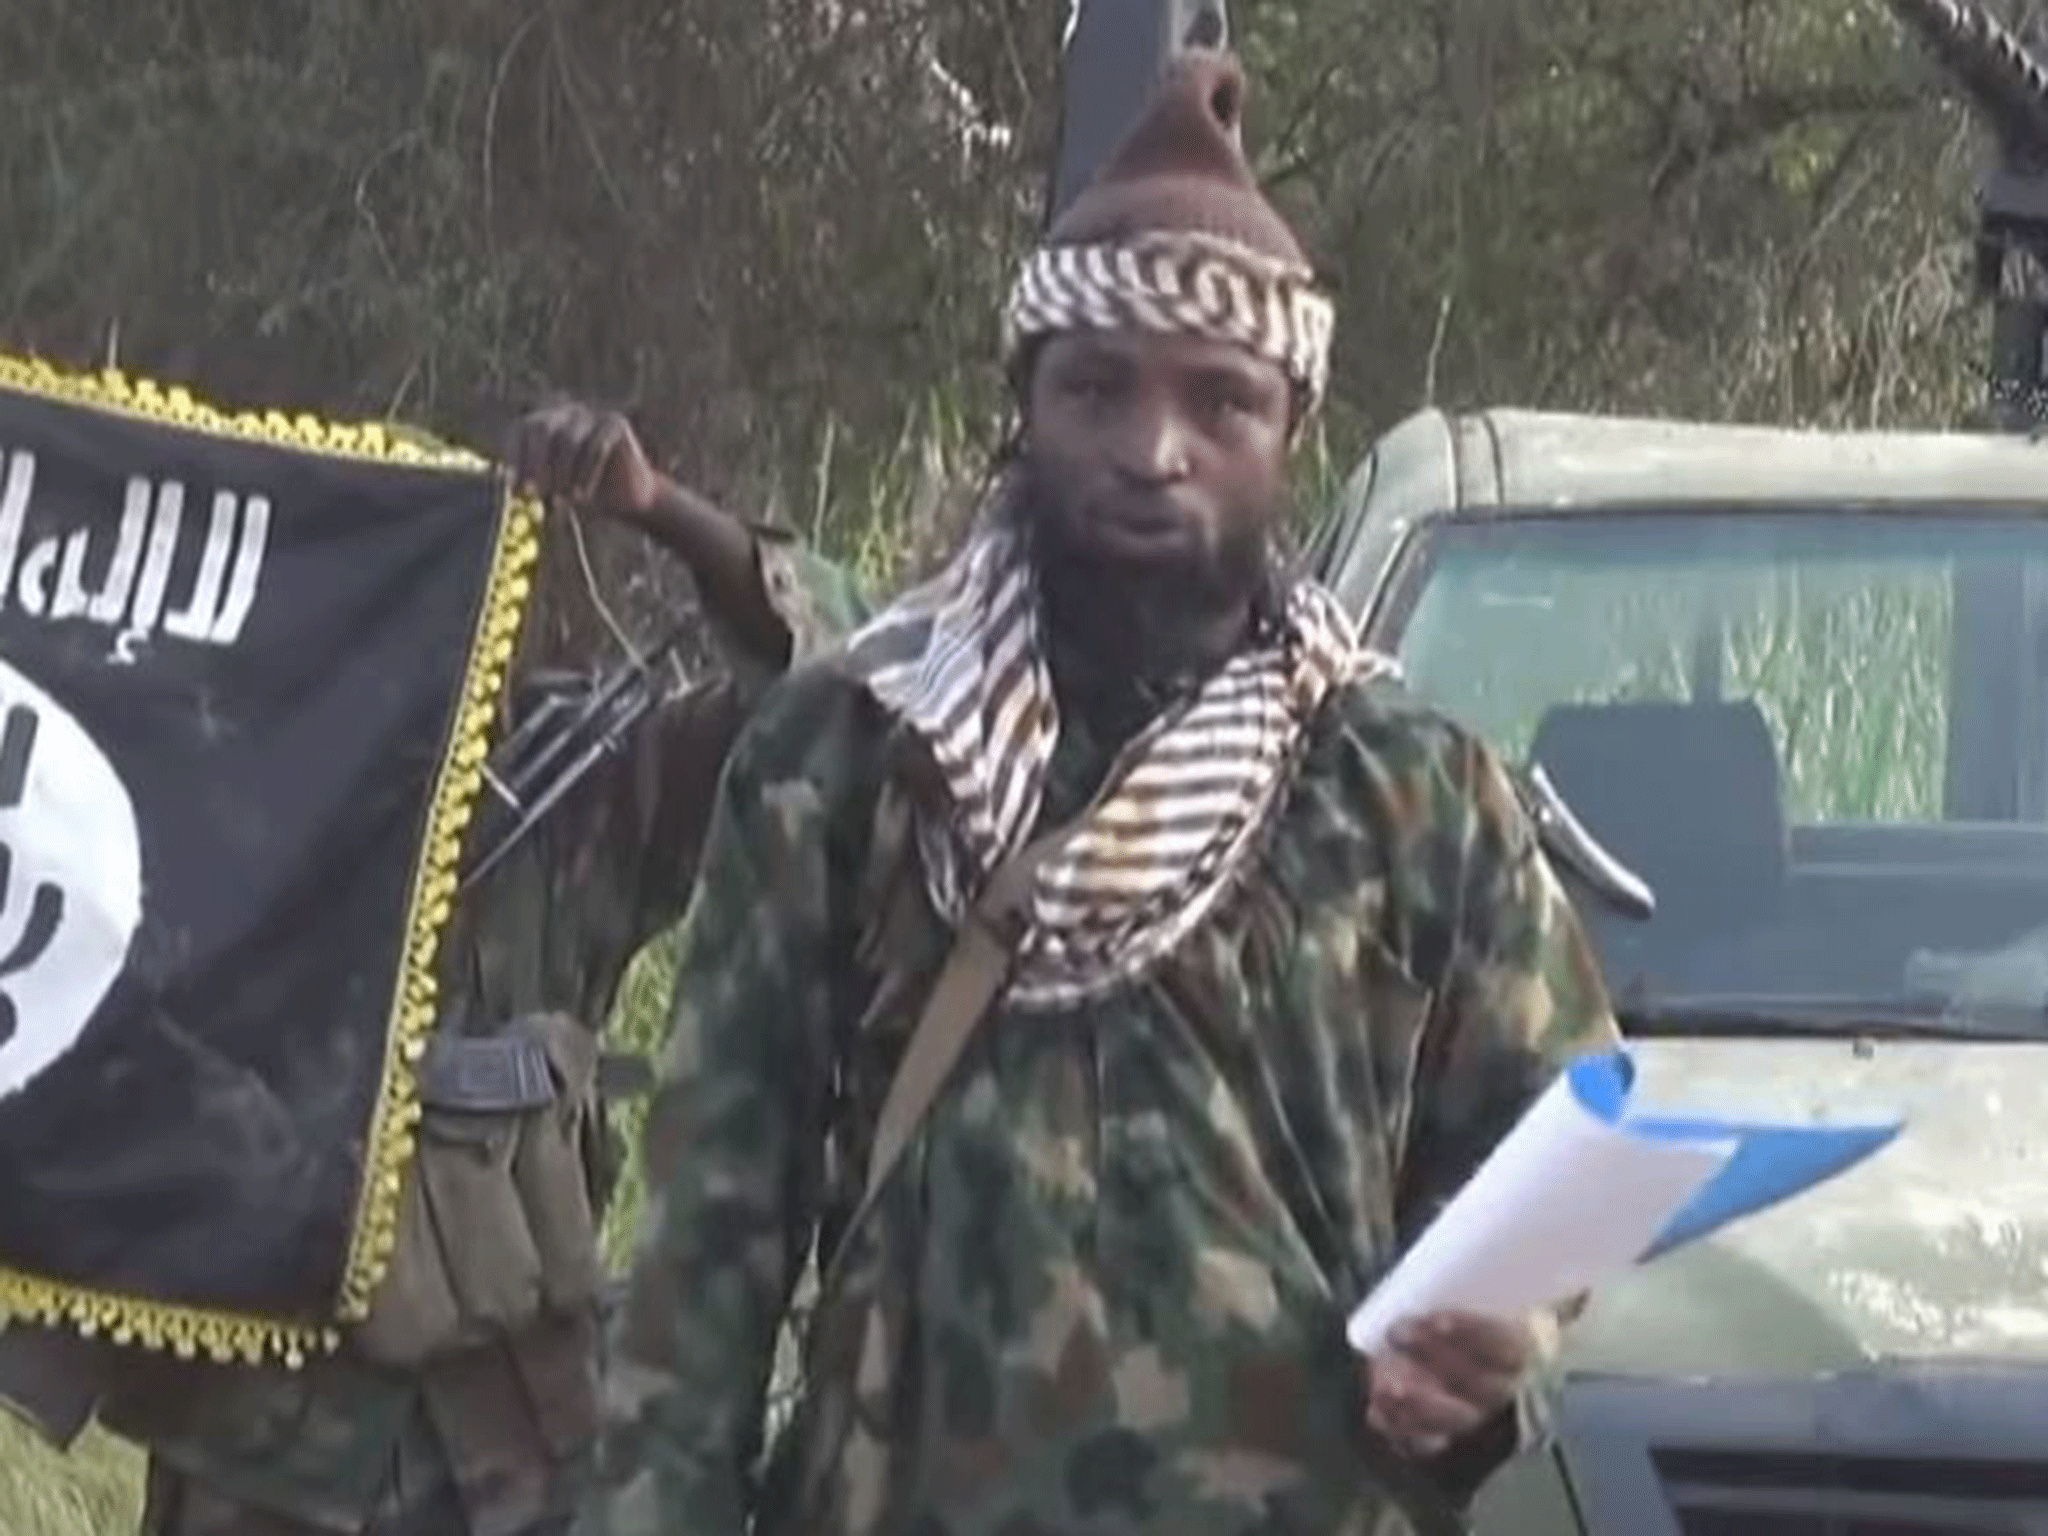 Abubakar Shekau, current leader of Boko Haram, speaking from a script to announce a "caliphate" in October 2014